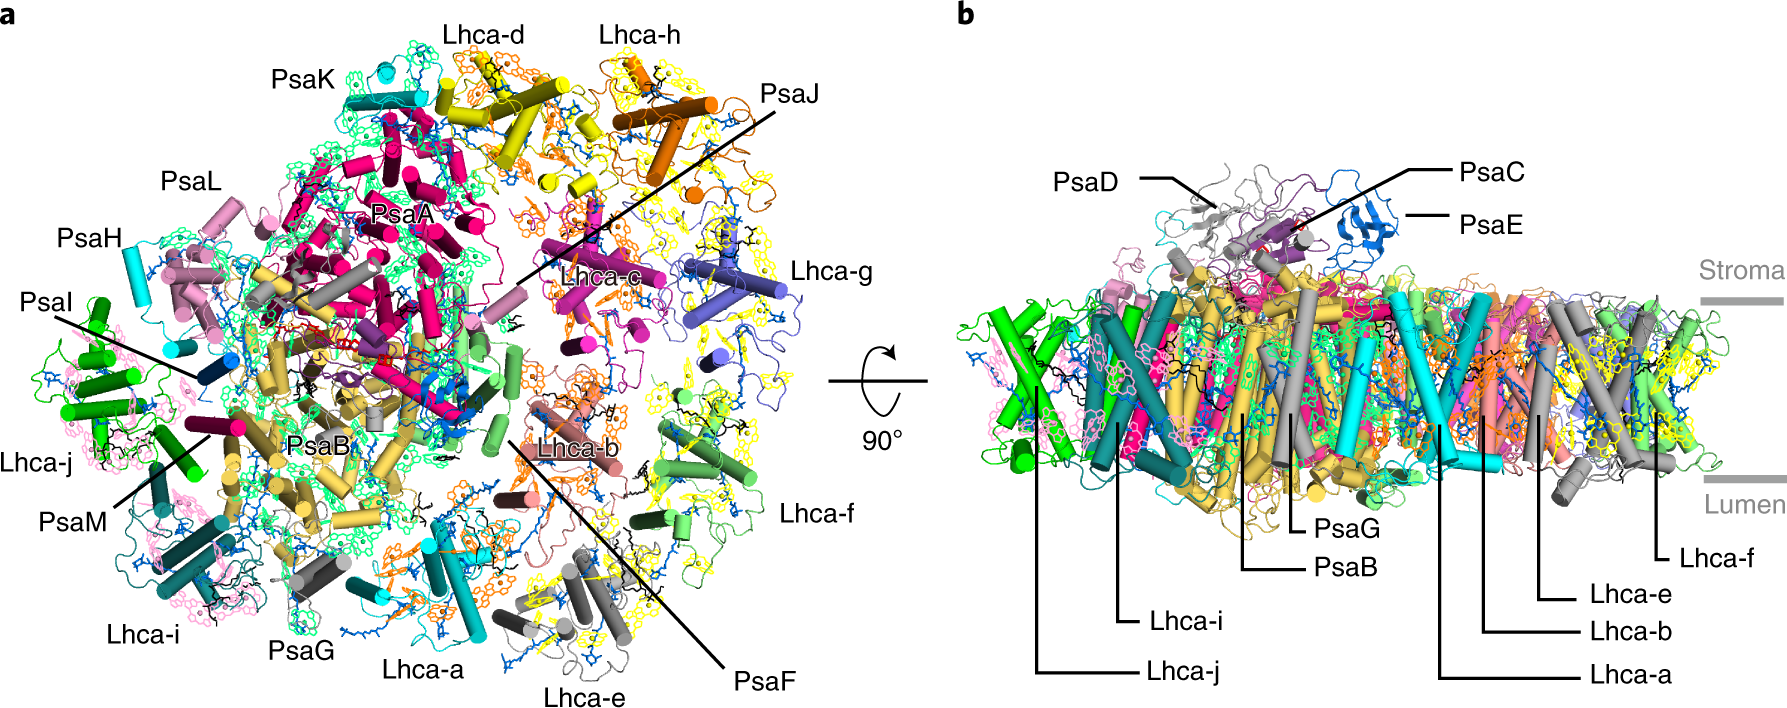 The Extended Light-Harvesting Complex (LHC) Protein Superfamily:  Classification and Evolutionary Dynamics